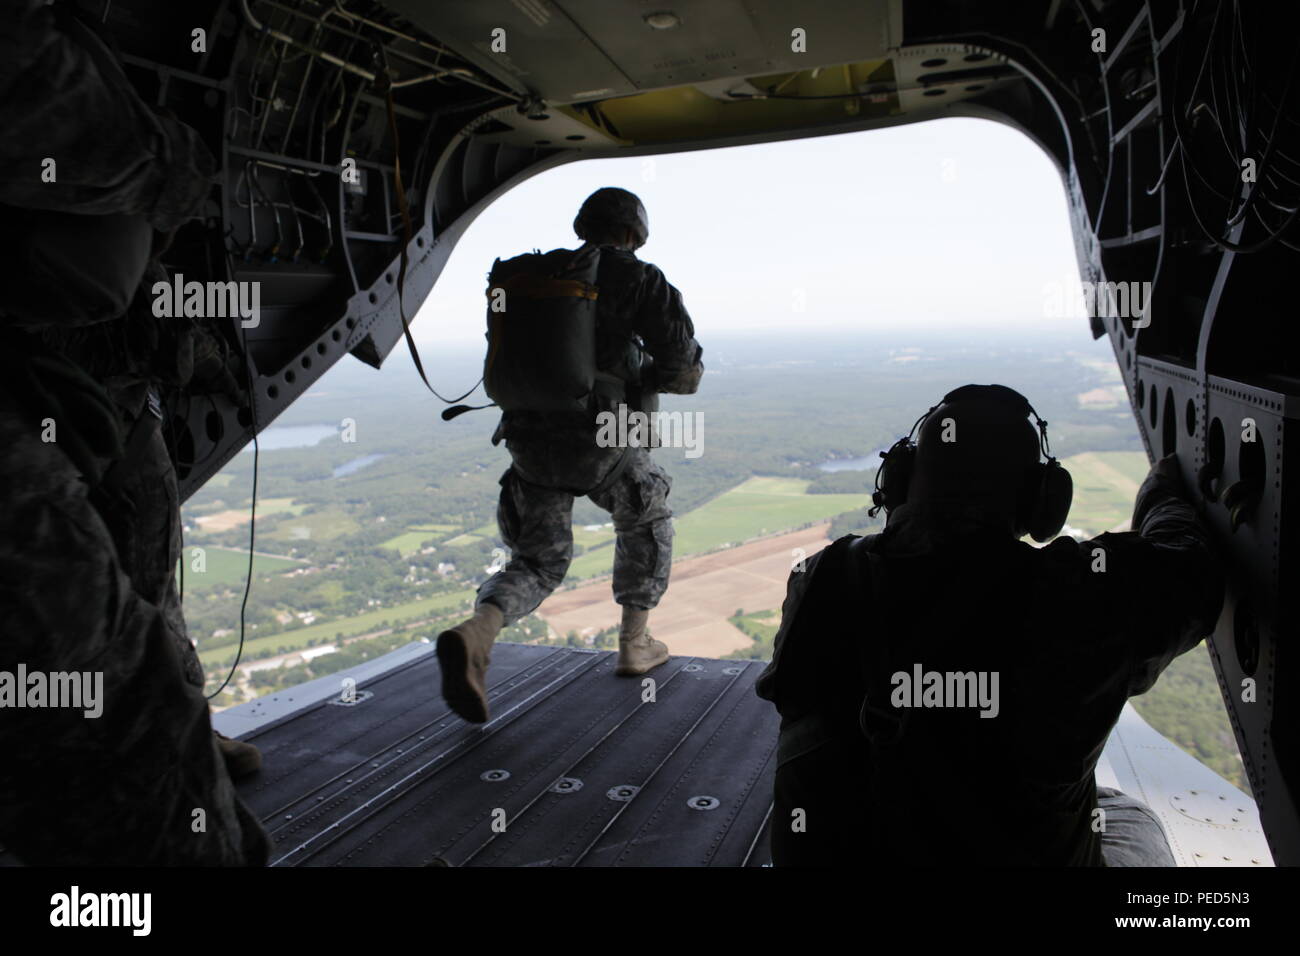 U.S. Army Master Sgt. Tommy O'Hare from the Special Operations Detachment Global, R.I. National Guard, gives the 'GO' signal U.S. Army Soldiers aboard a CH-47 Chinook, Aug. 1, 2015. Leapfest is an International parachute competition hosted by the 56th Troop Command, Rhode Island National Guard to promote high level technical training and esprit de corps within the International Airborne community. (U.S. Army Photo by Sgt. 1st Class Horace Murray/ Released) Stock Photo